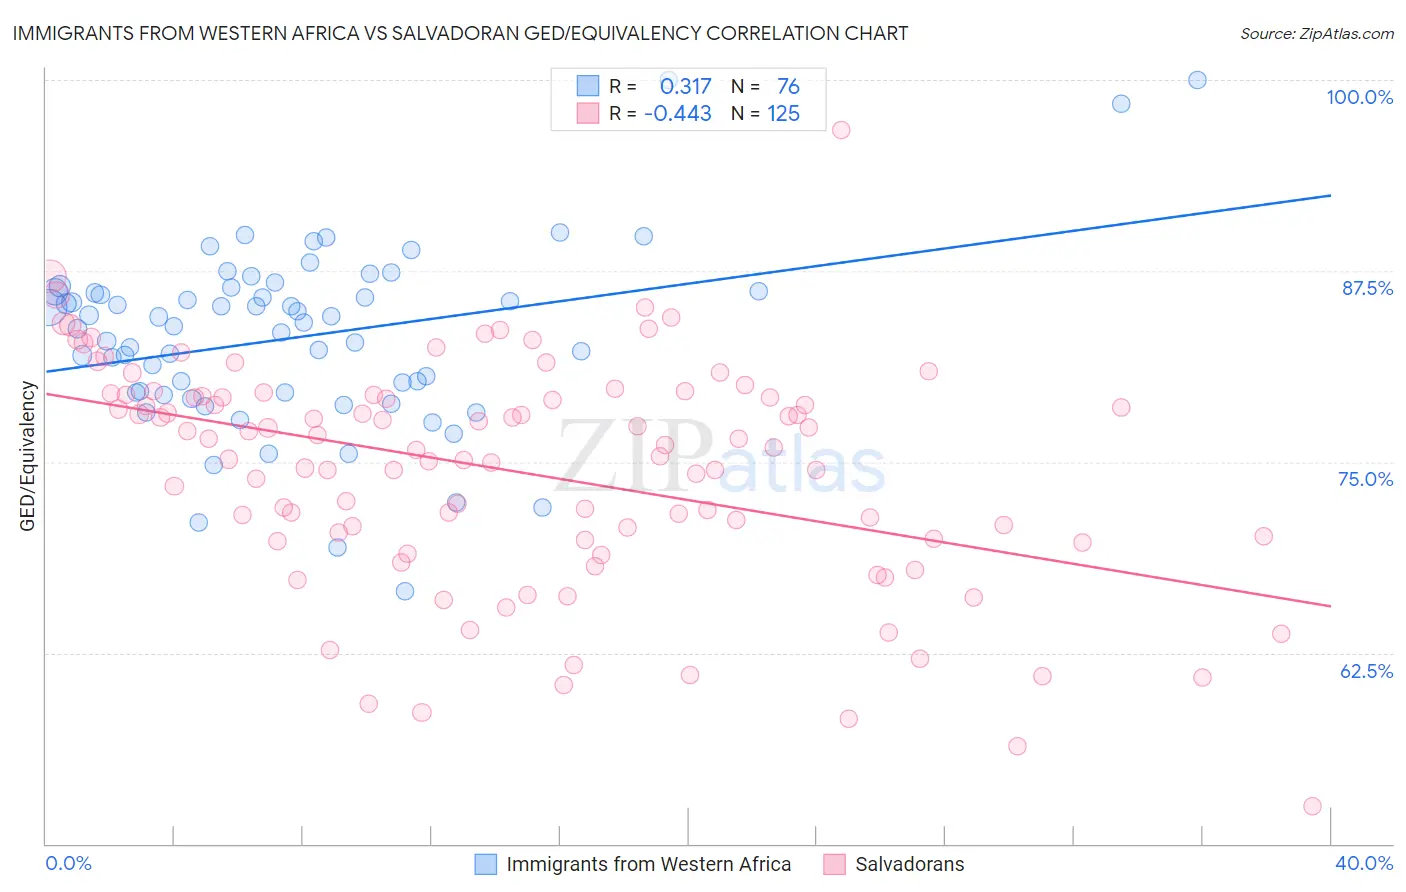 Immigrants from Western Africa vs Salvadoran GED/Equivalency